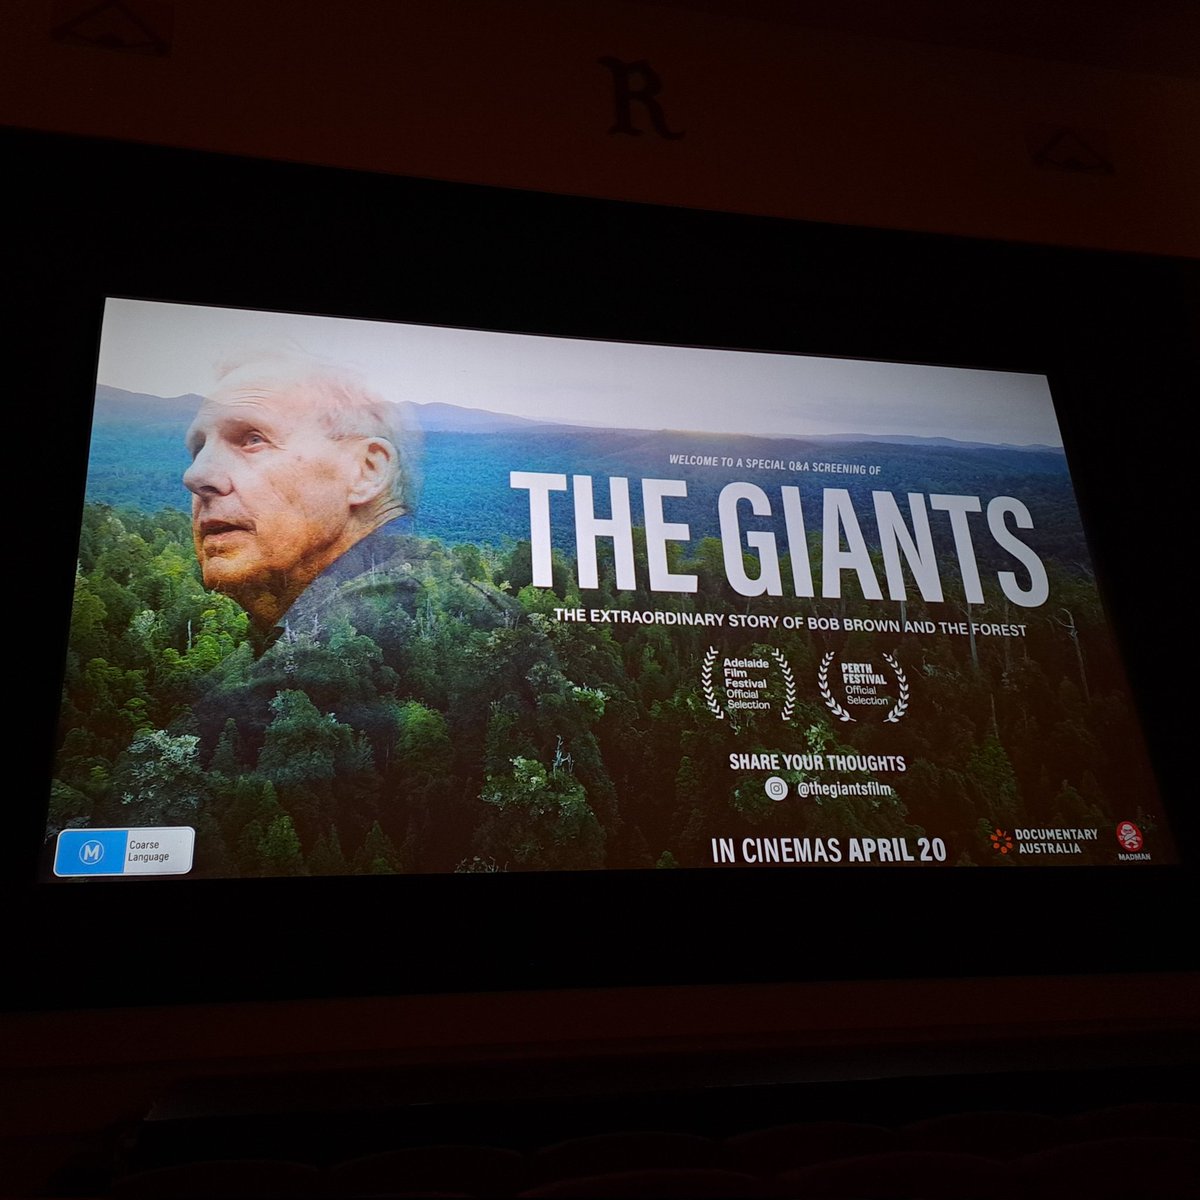 At @randwickritz to watch #TheGiants - The Extraordinary Story of #BobBrown and the #Forest. 🌳 #trees #environment #thegiantsfilm